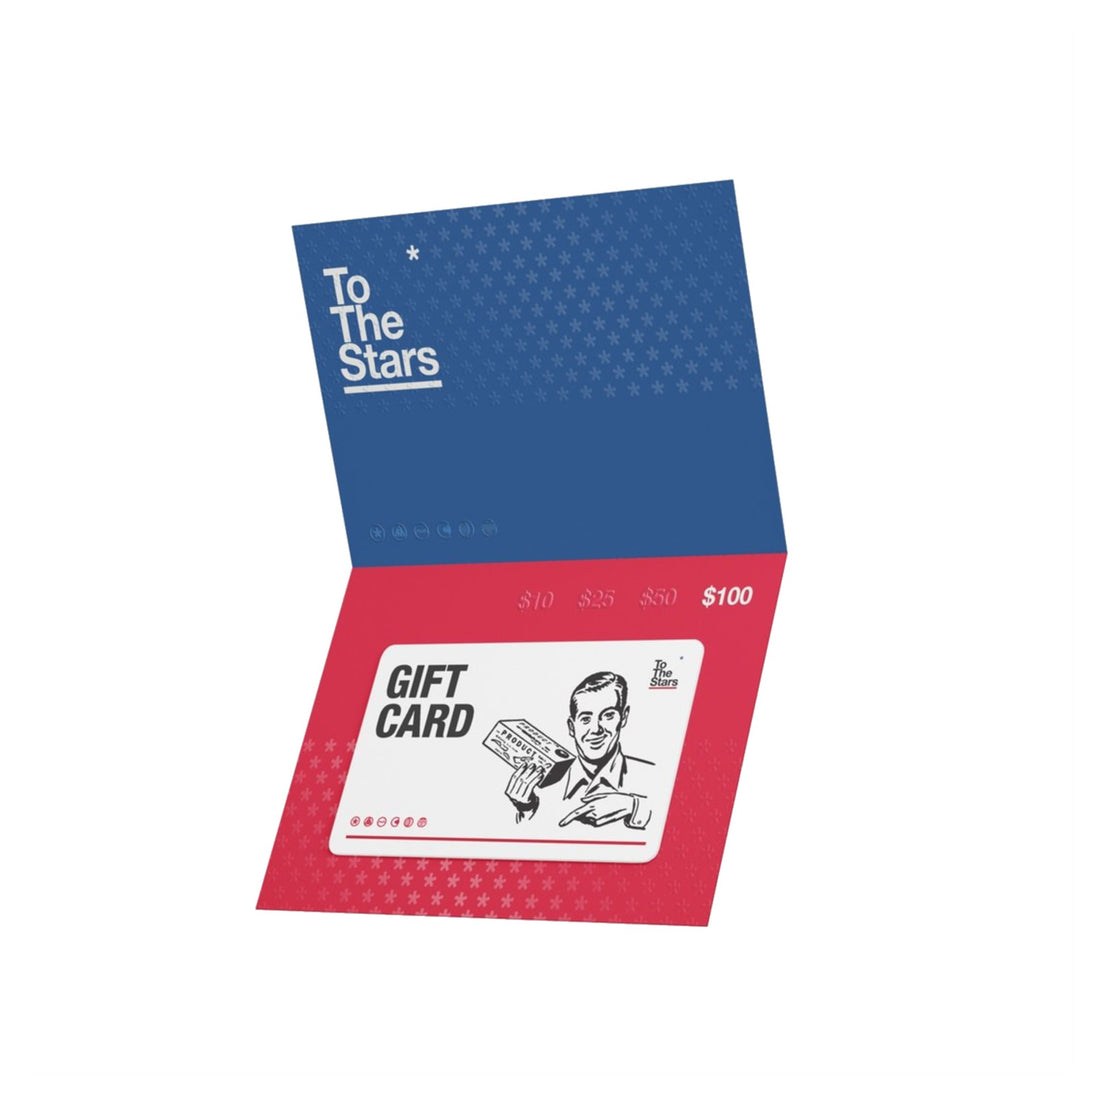 To The Stars Universe Digital Gift Card